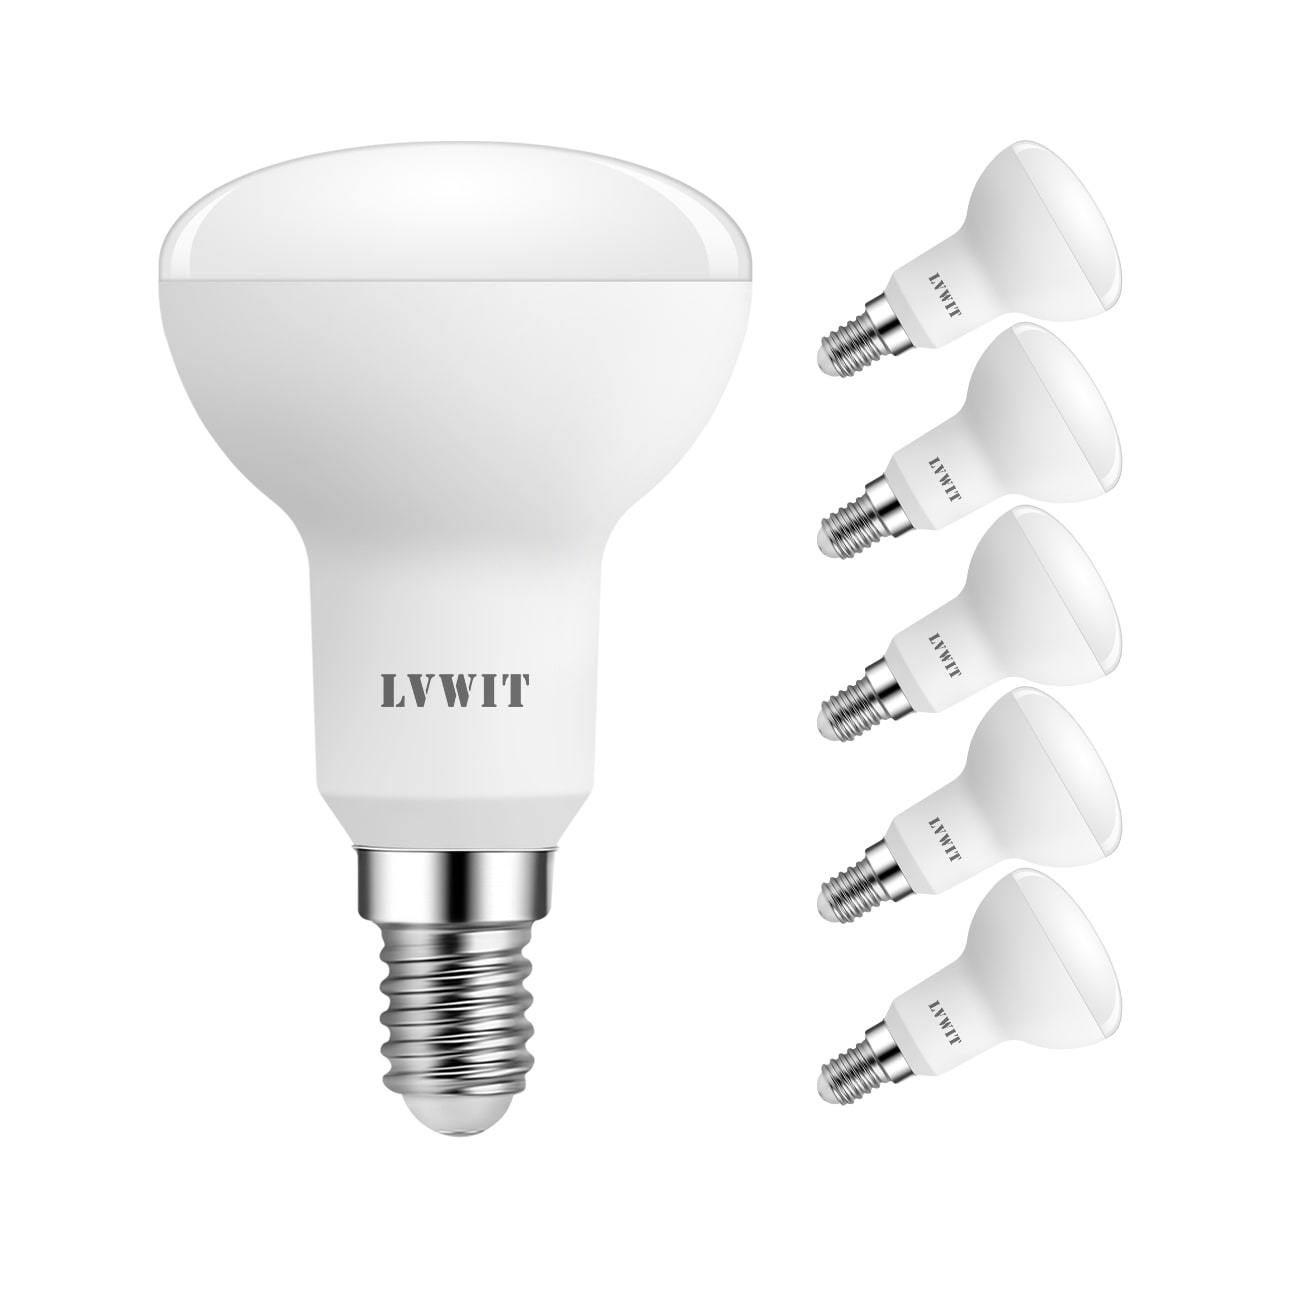 4 Ampoules LED B22 5 W blanc froid 4 Ampoules LED B22 5 W blanc fro